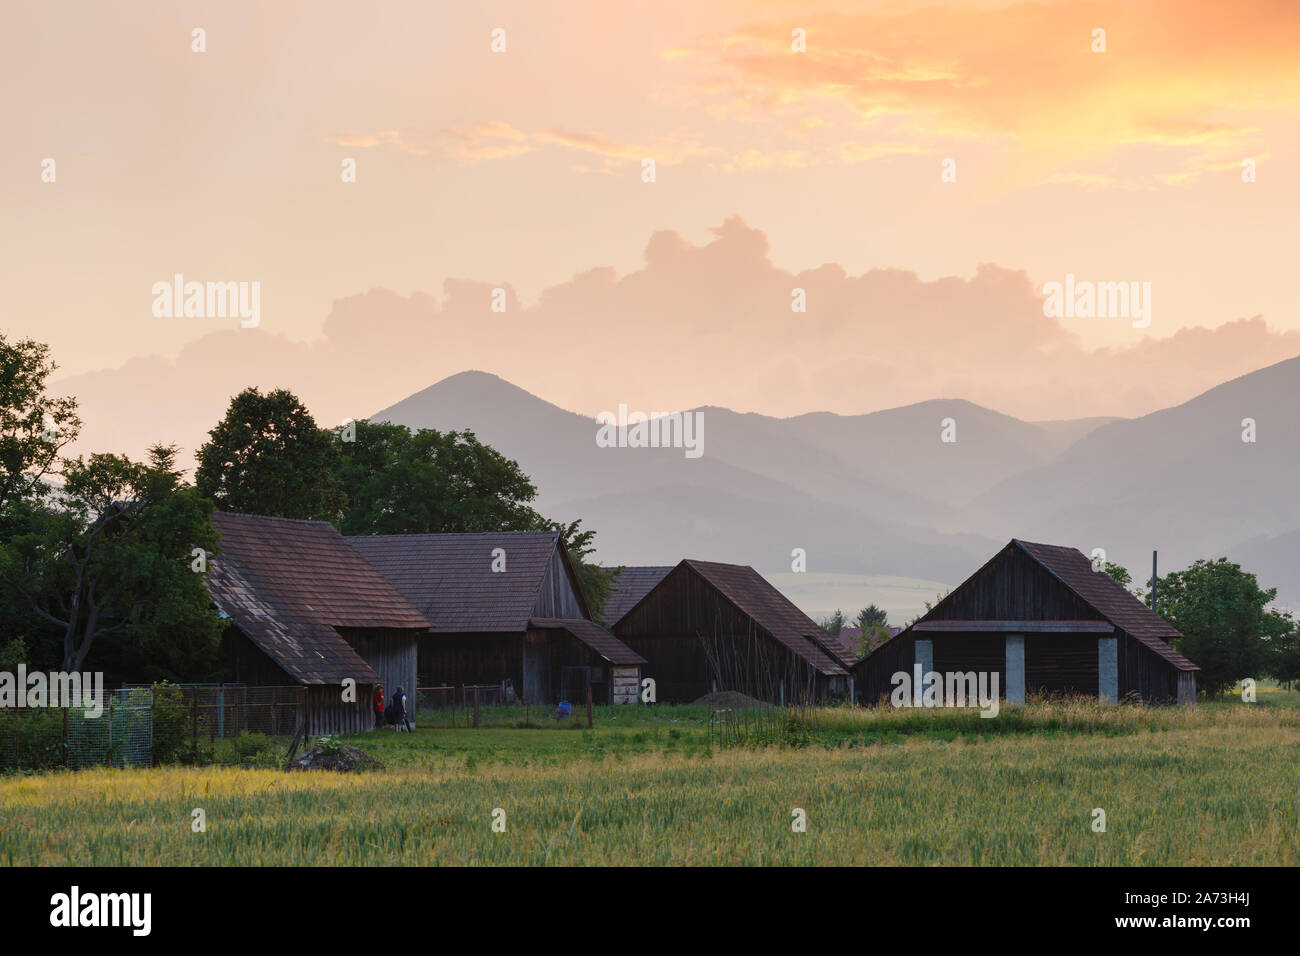 Clearing storm over a rural landscape with a traditional barn in Turiec region, central Slovakia. Stock Photo